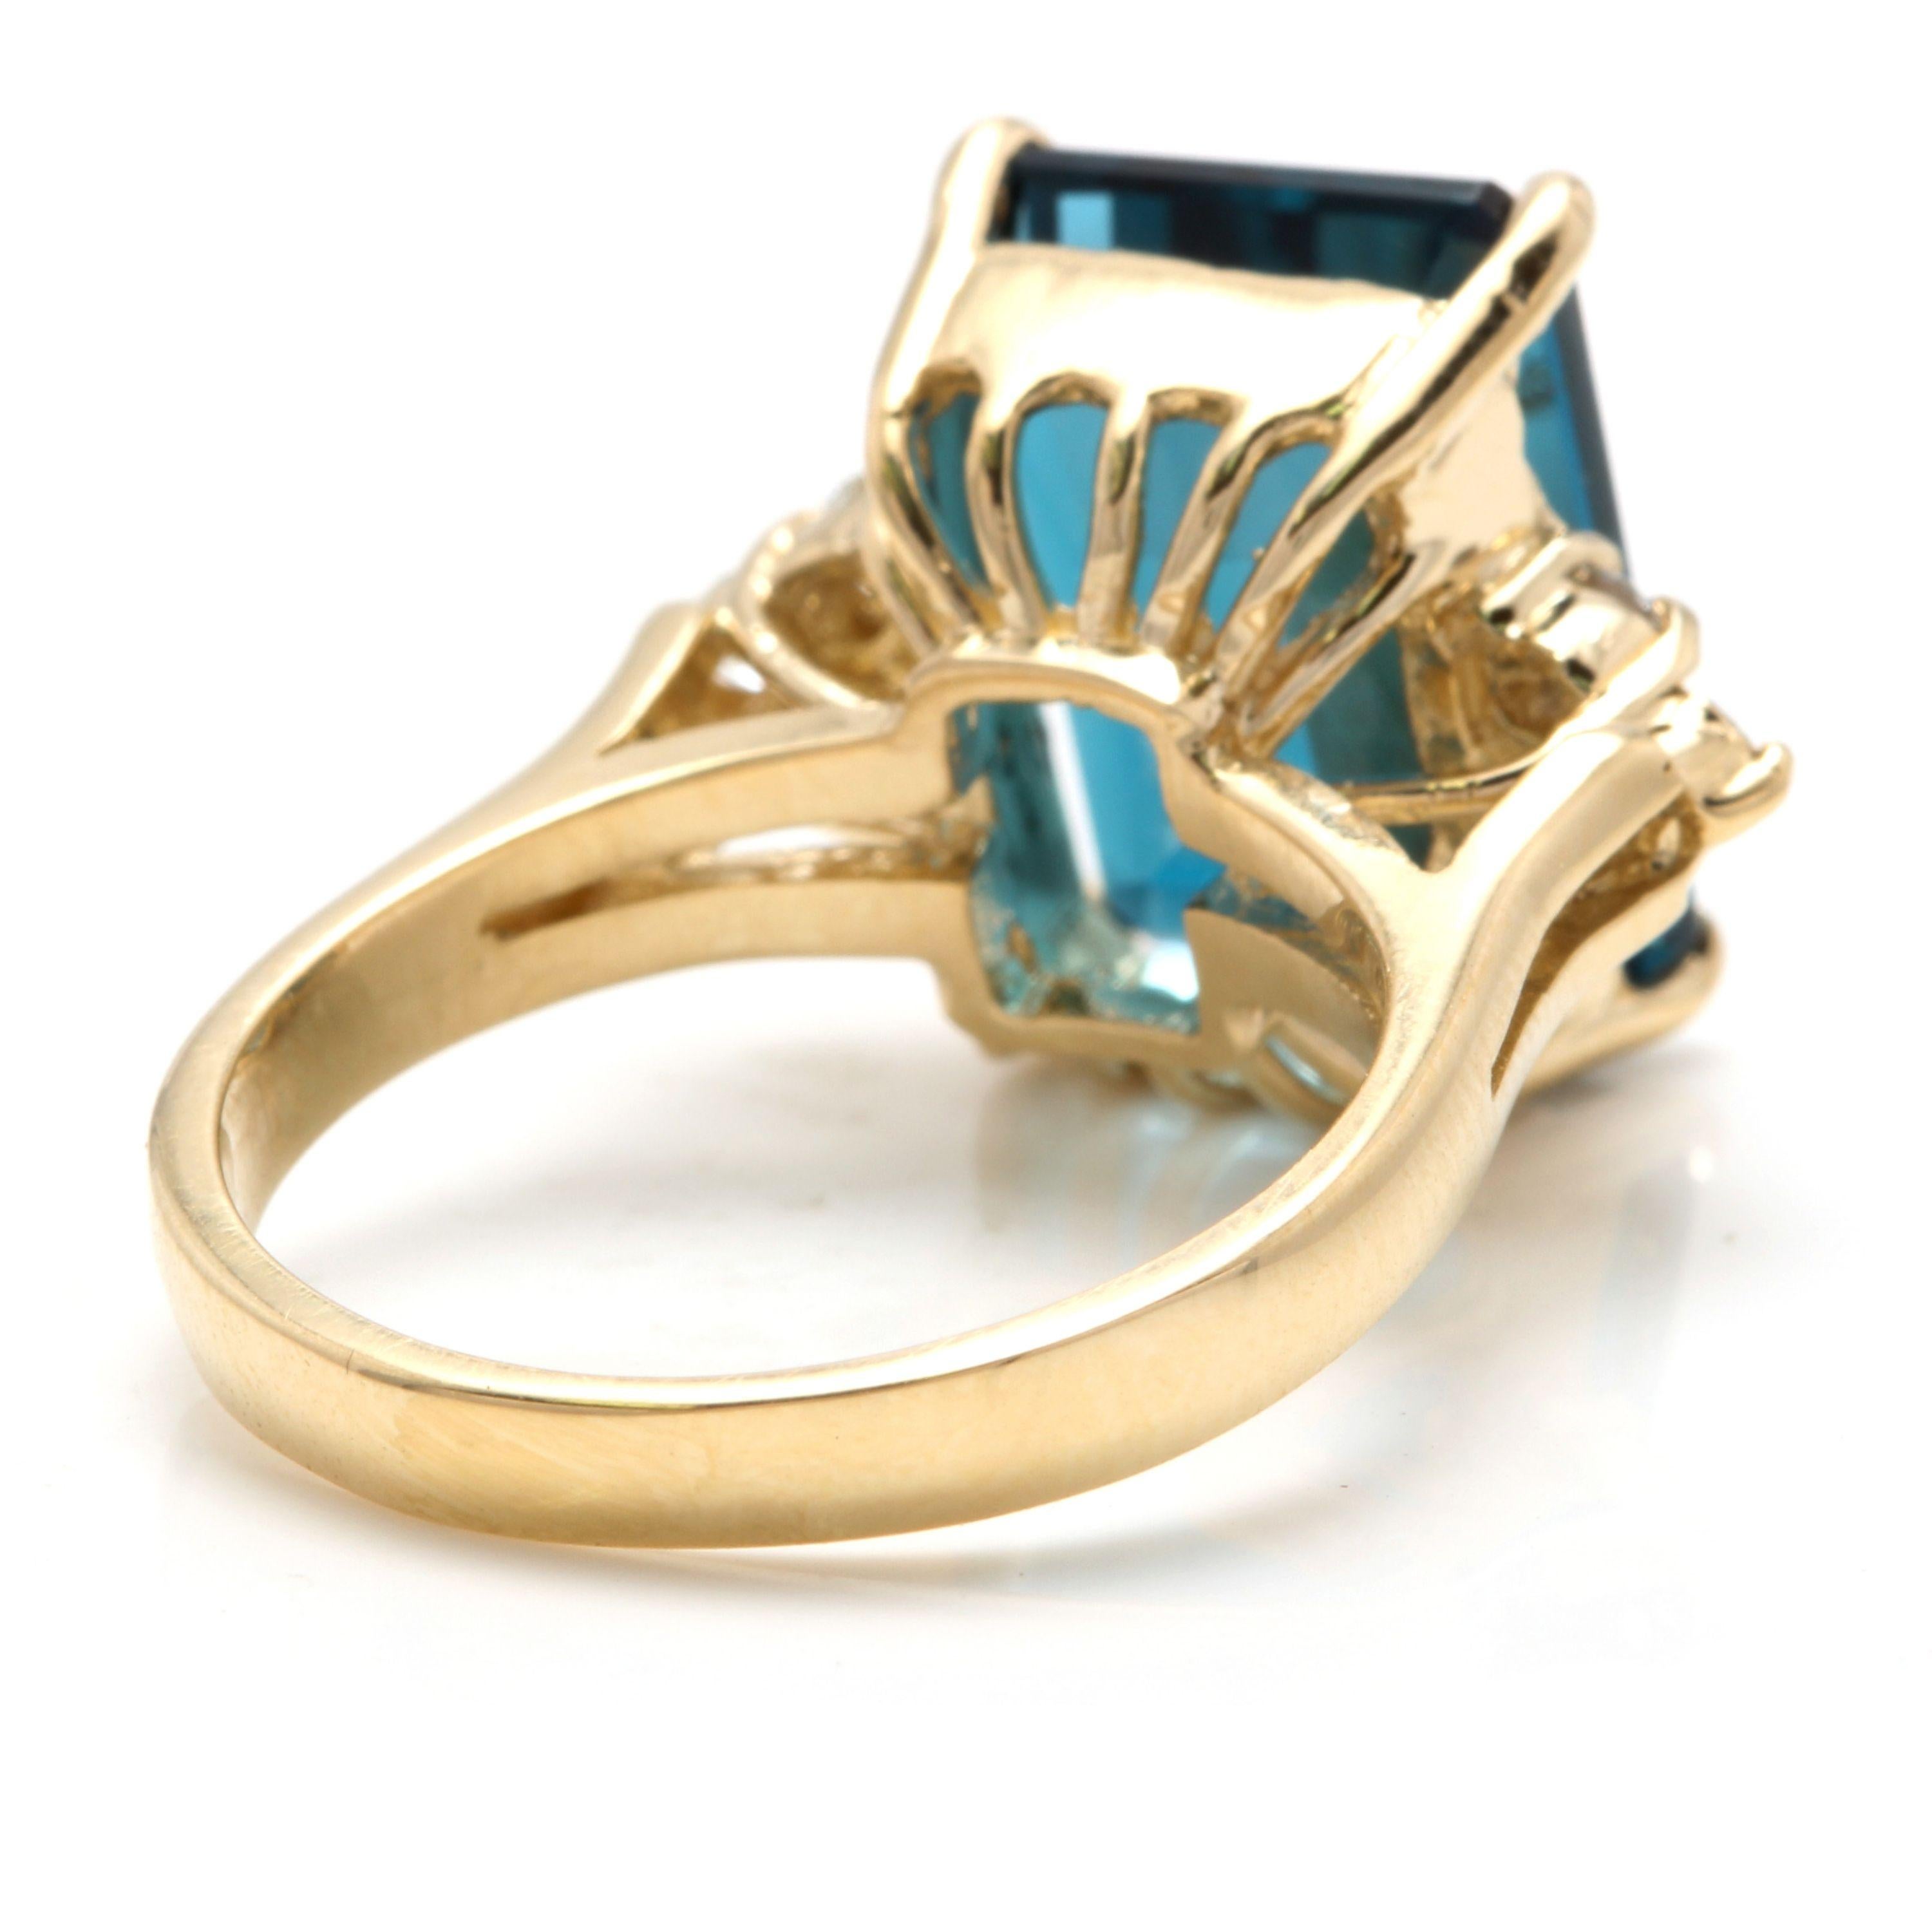 Mixed Cut 9.85 Carat Natural Impressive London Blue Topaz and Diamond 14k Yellow Gold Ring For Sale